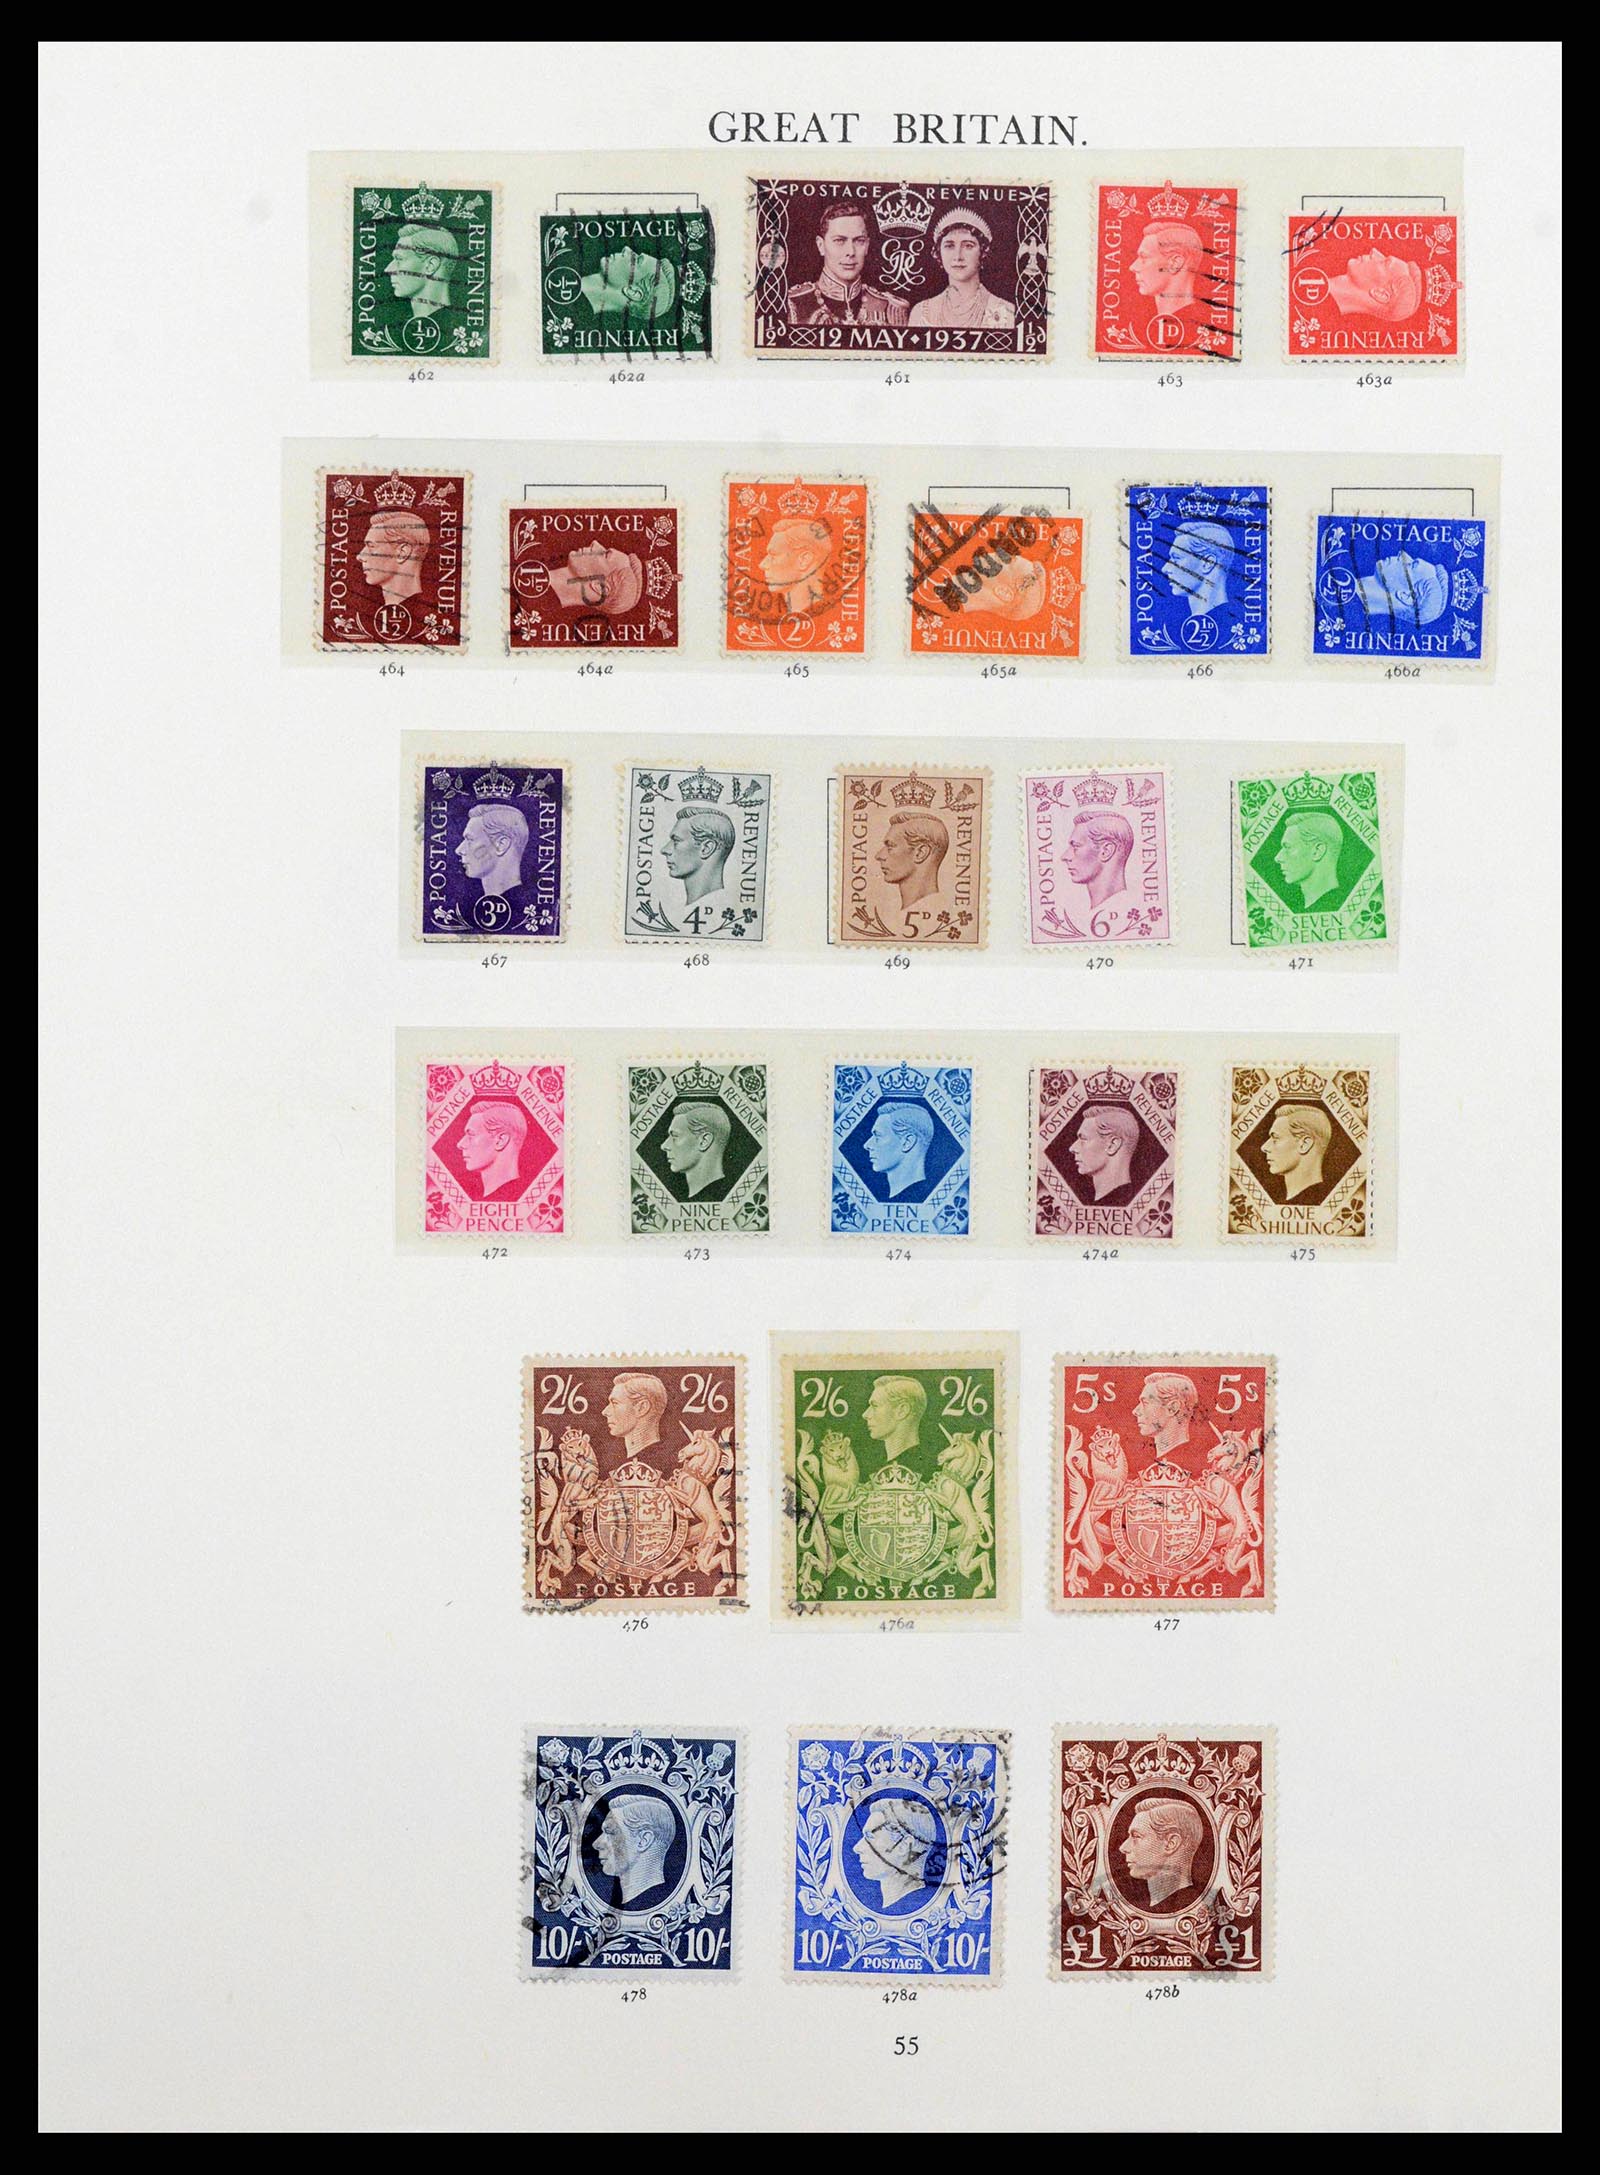 38460 0027 - Stamp collection 38460 Great Britain 1840-1992.